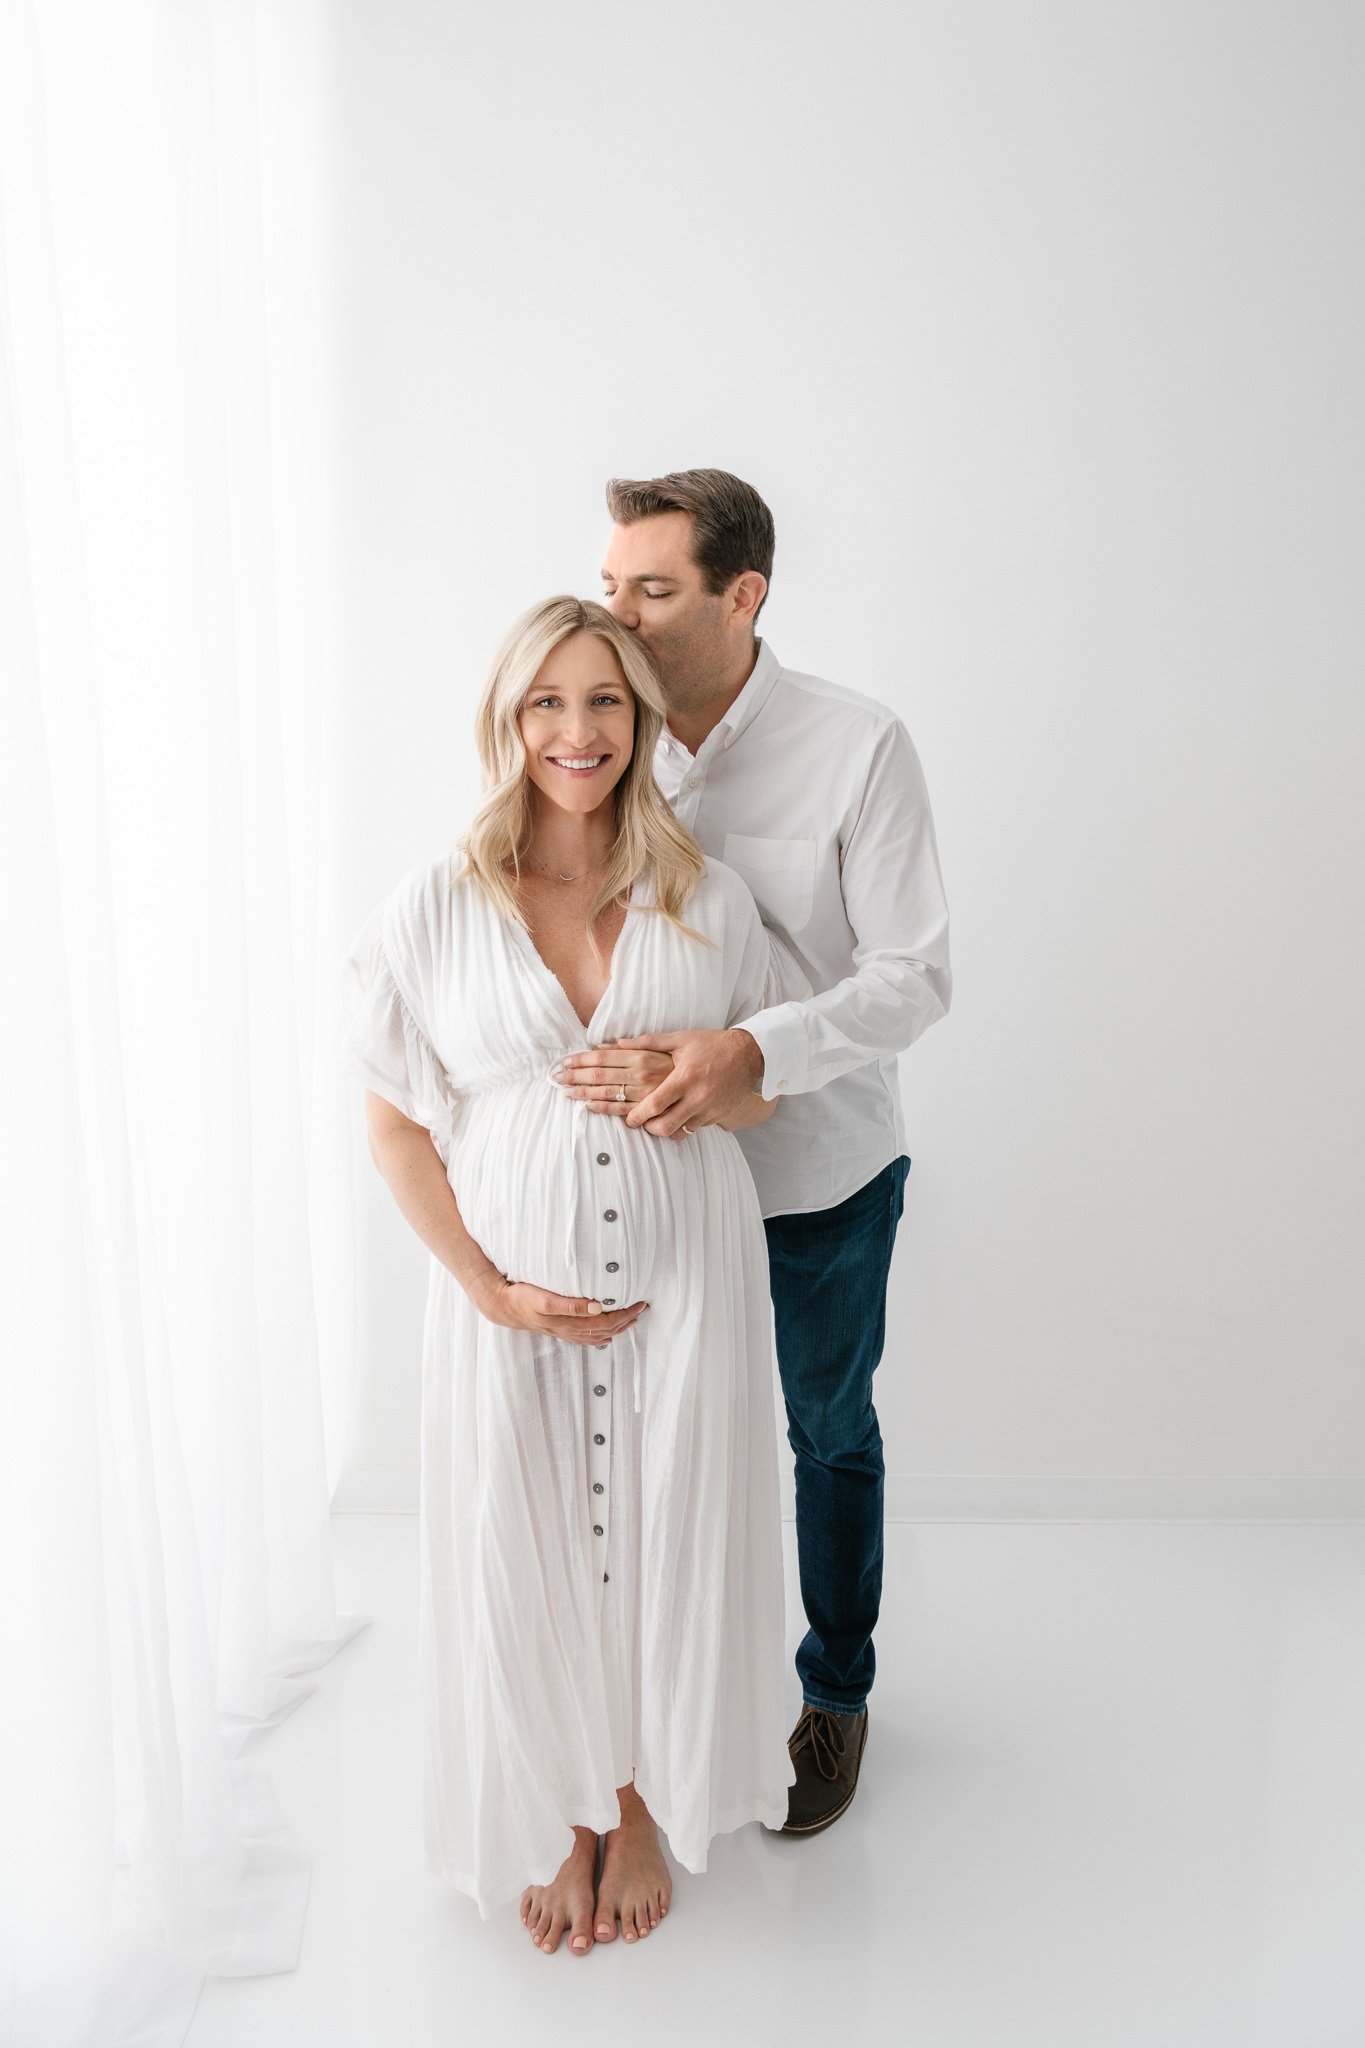  Portrait of soon-to-be parents with the husband kissing his wife's head by Nicole Hawkins Photography. before the baby pics #NicoleHawkinsPhotography #NicoleHawkinsMaternity #Studiomaternityportraits #NewJerseymaternity #NewYorkMaternity 